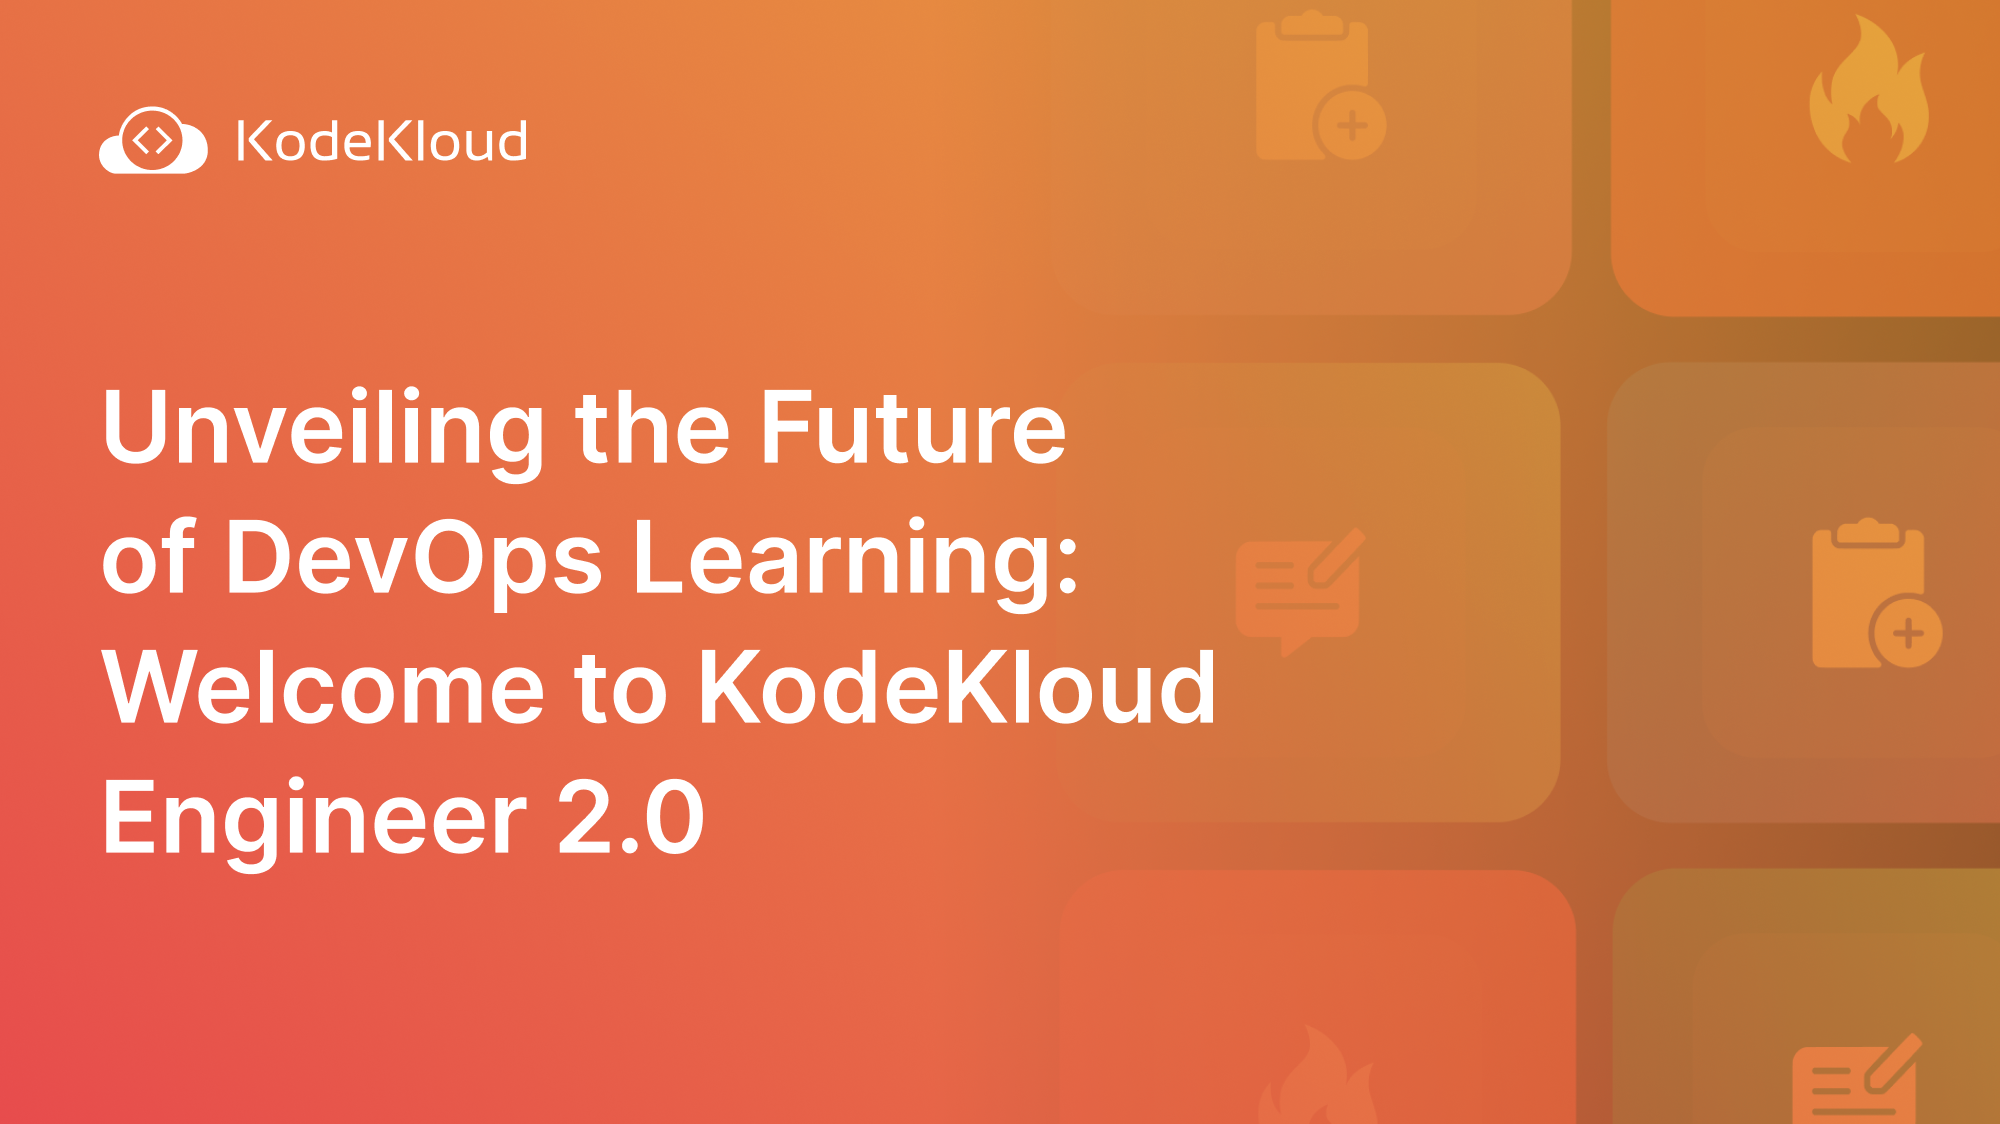 Unveiling the Future of DevOps Learning: Welcome to KodeKloud Engineer 2.0